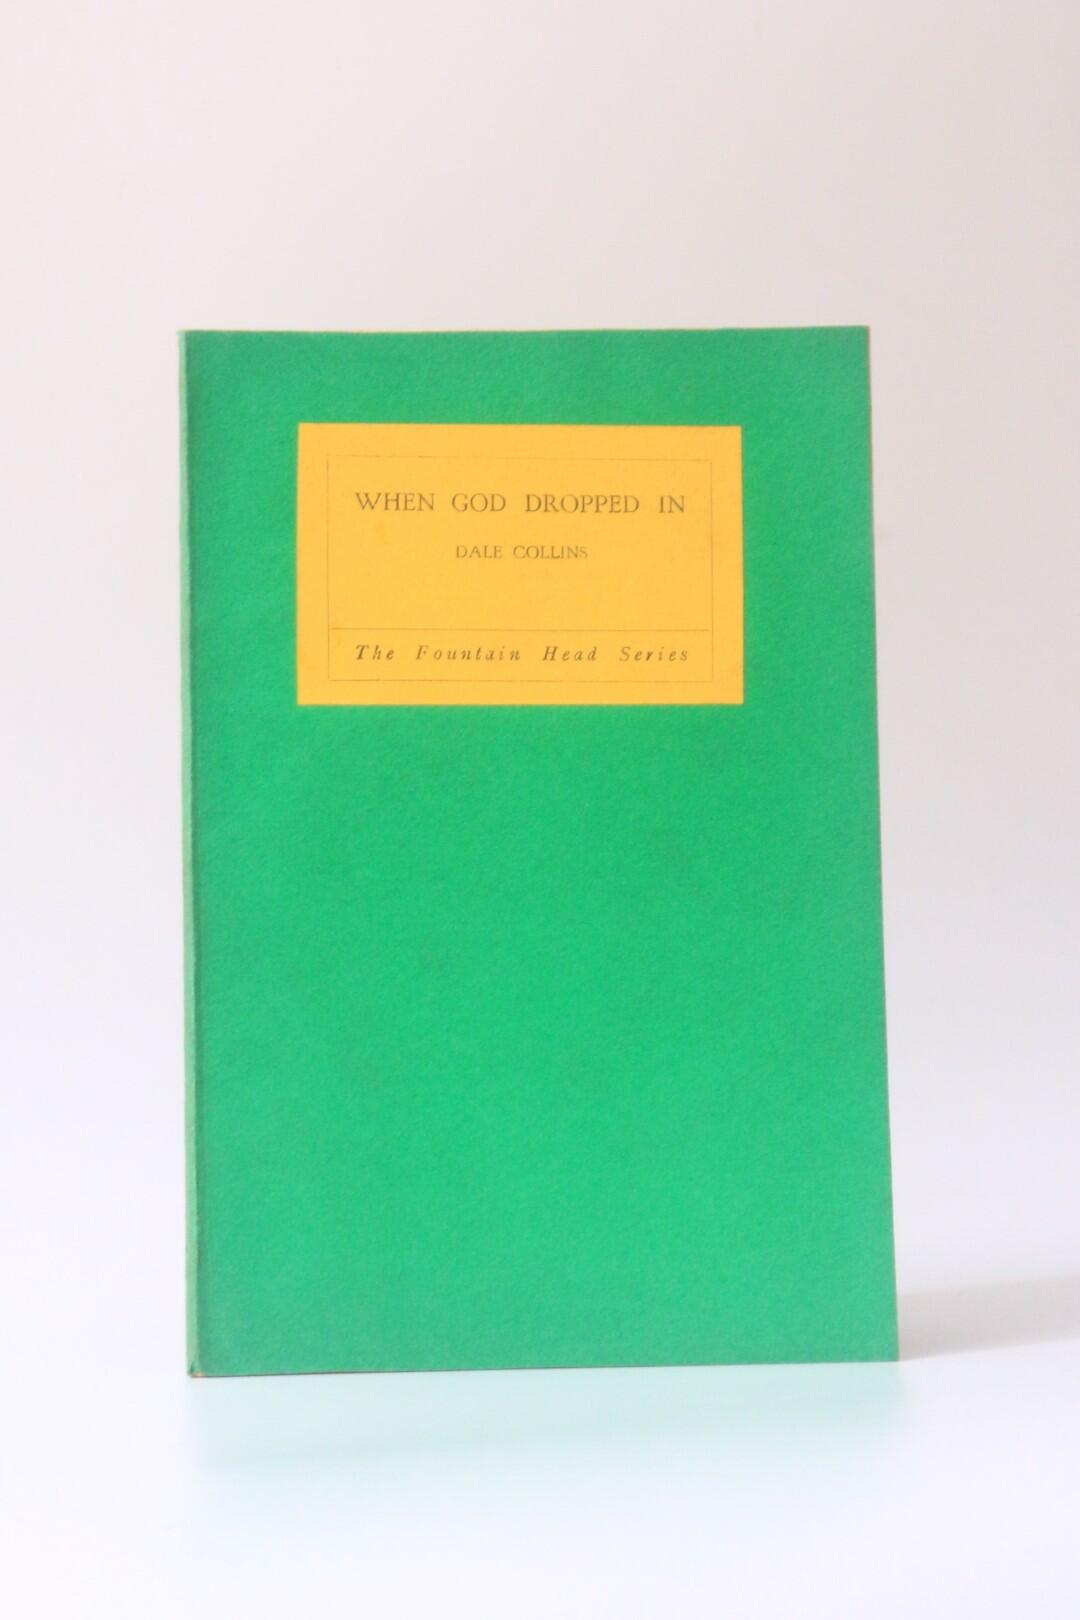 Dale Collins - When God Dropped In - Herbert Joseph, 1931, First Edition.